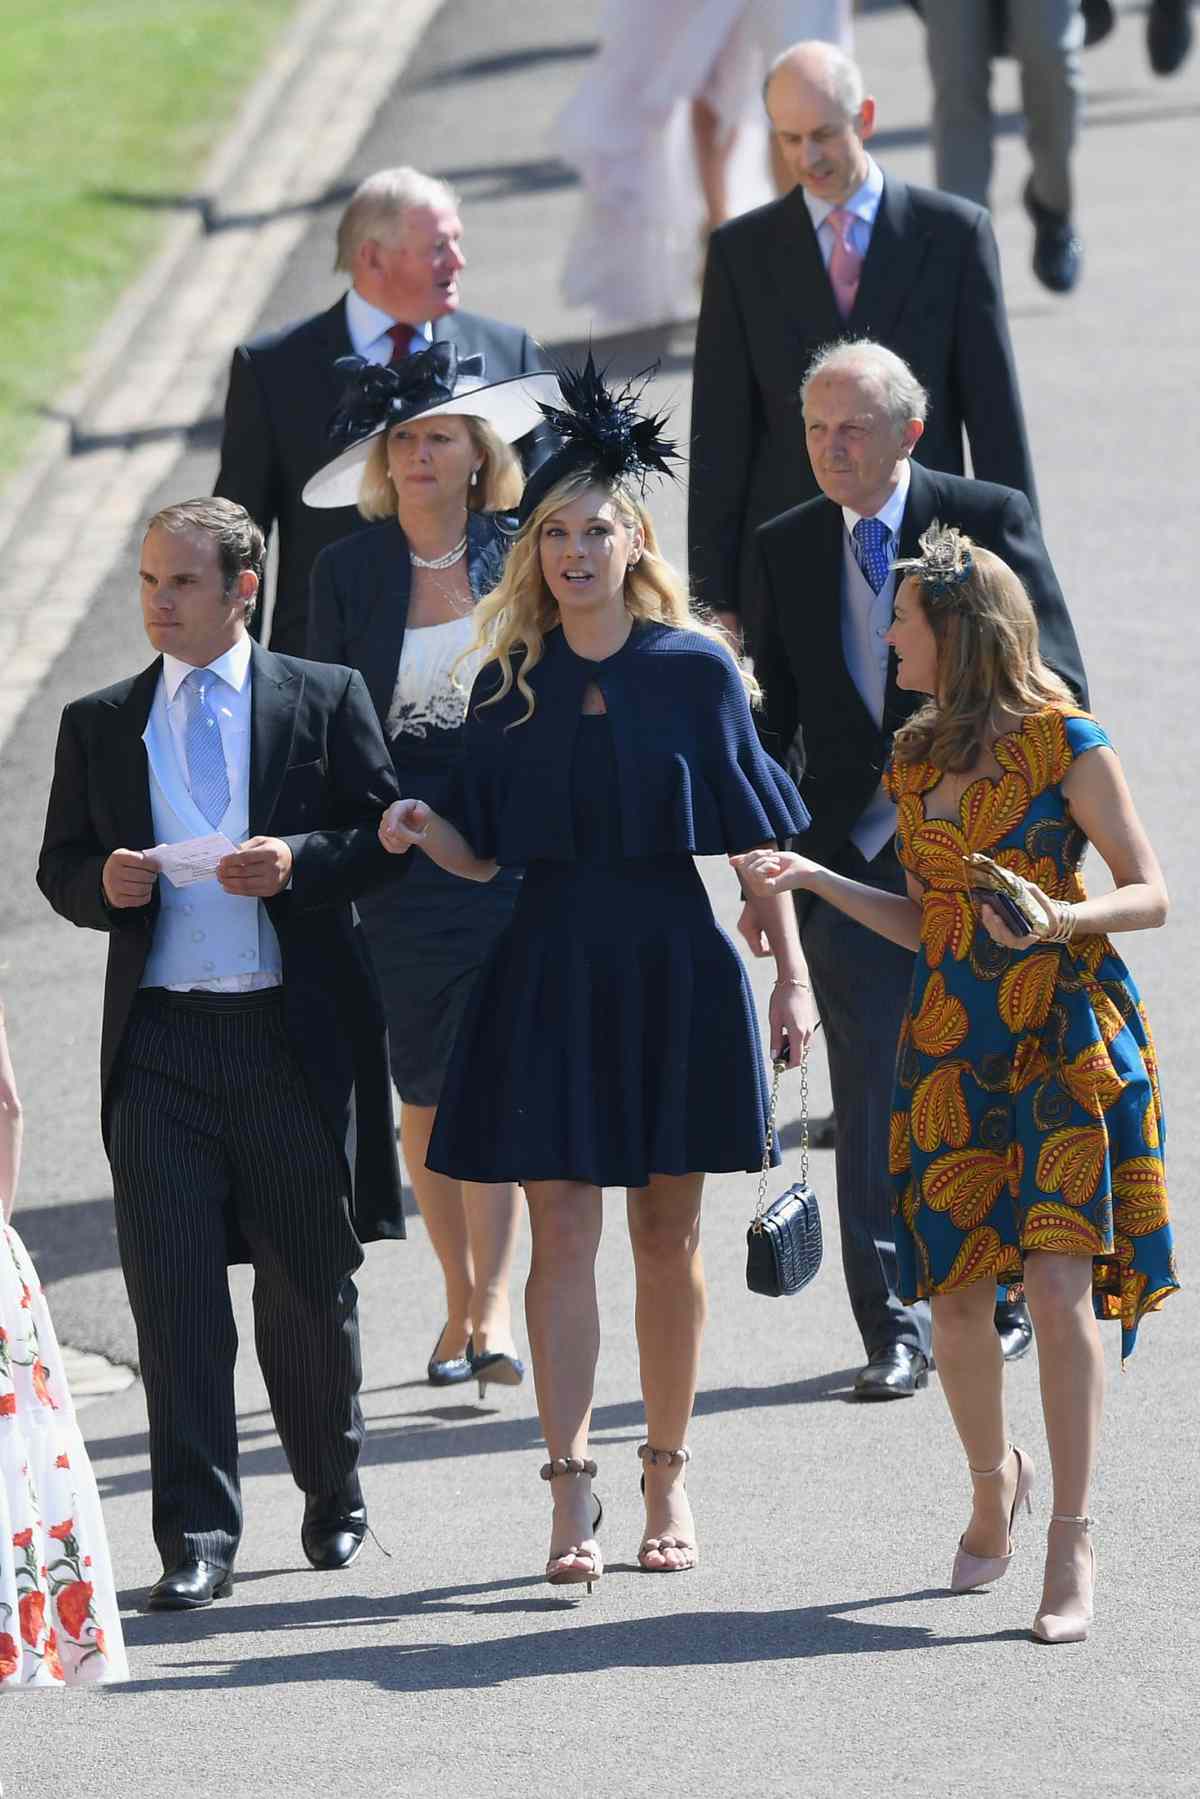 Prince Harry's Ex-Girlfriend Chelsy Davy Arrives